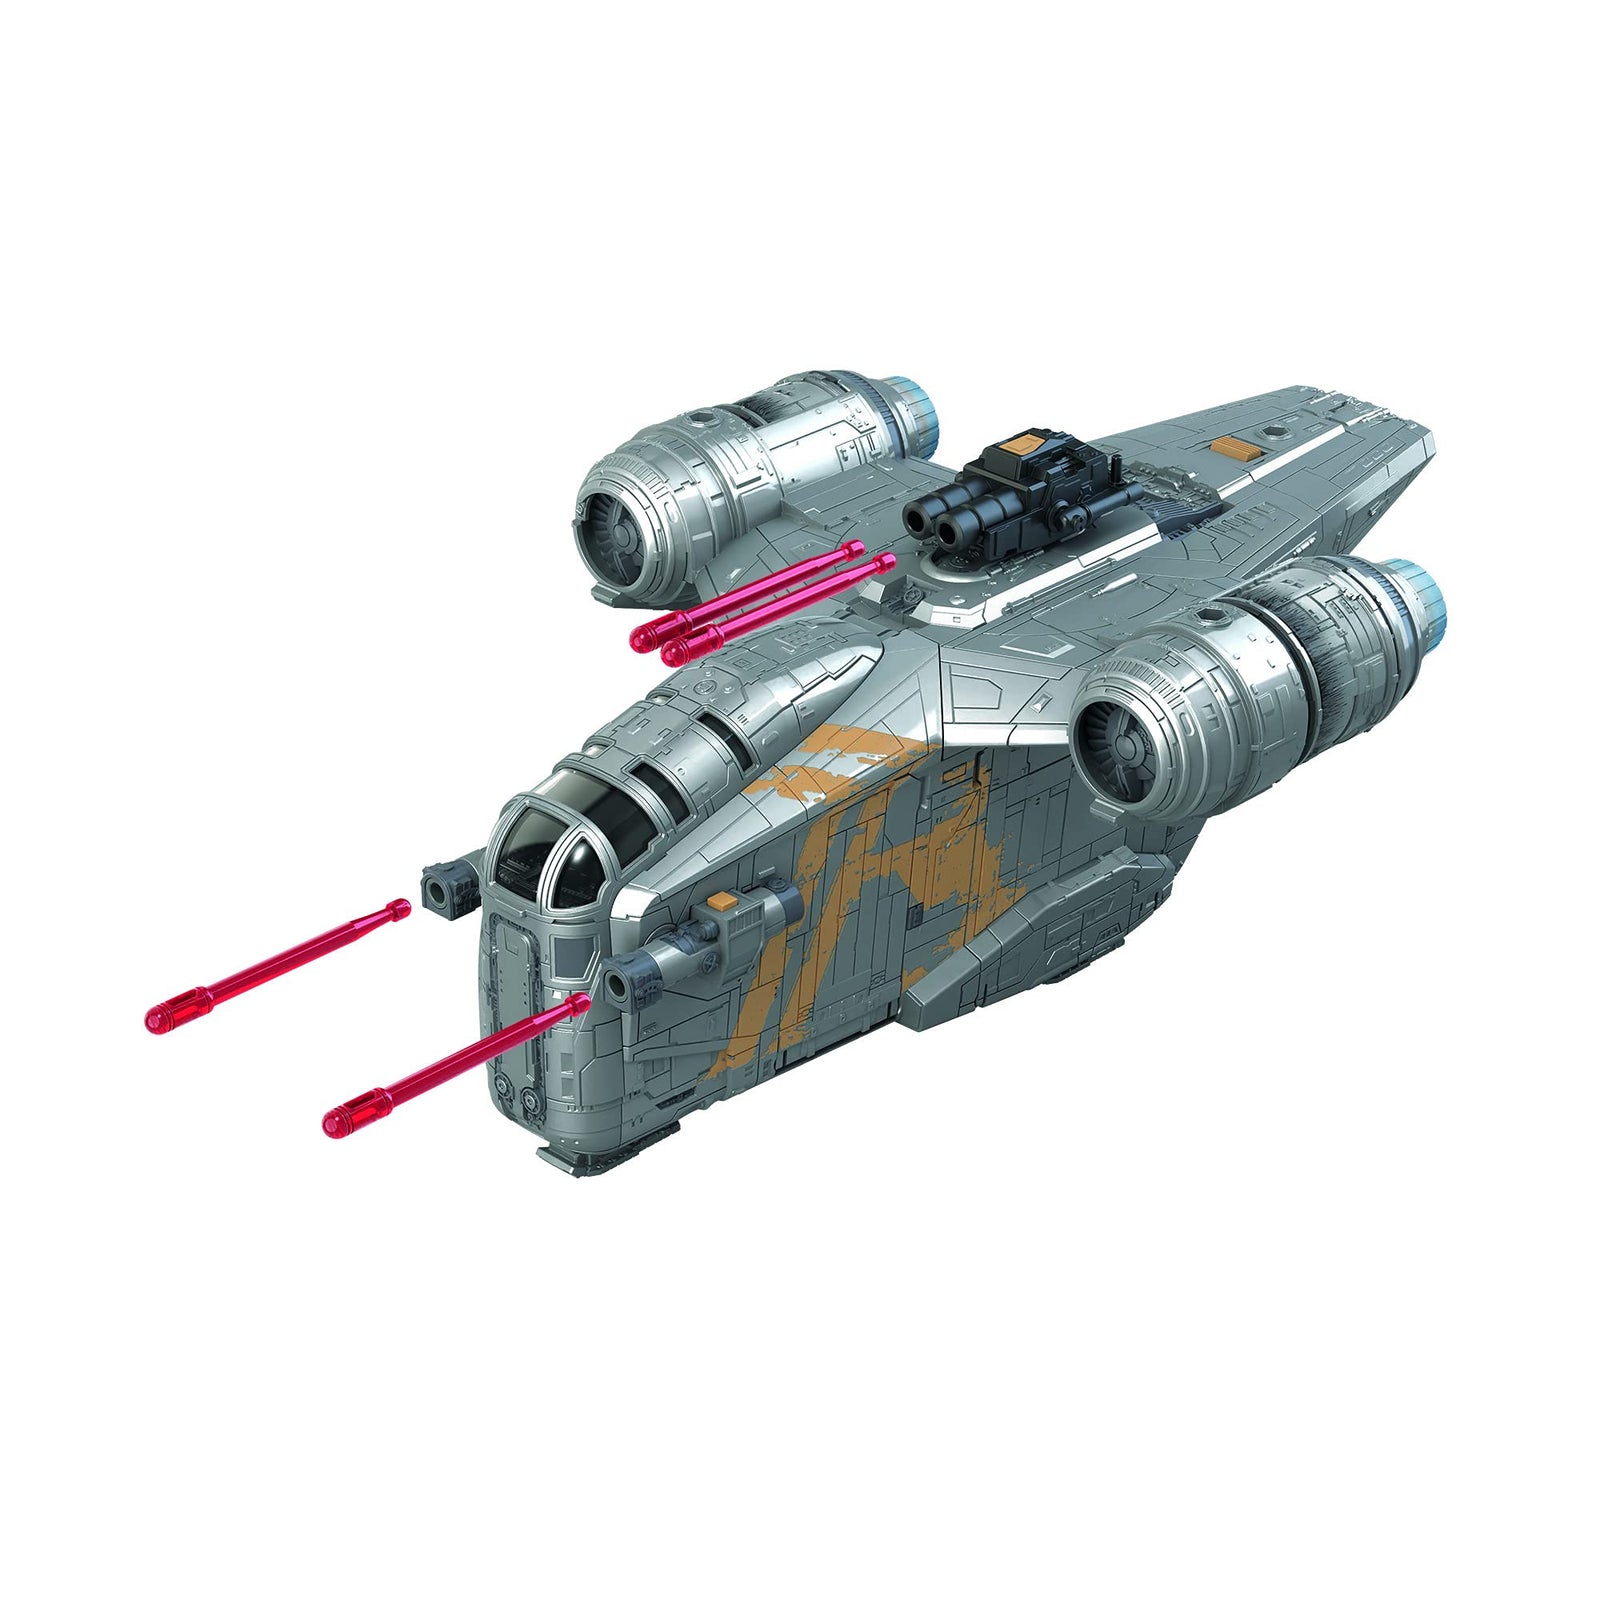 Star Wars Mission Fleet The Mandalorian The Child Razor Crest Outer Rim Run Deluxe Vehicle with 2.5-Inch-Scale Figure, for Kids Ages 4 and Up,F0589